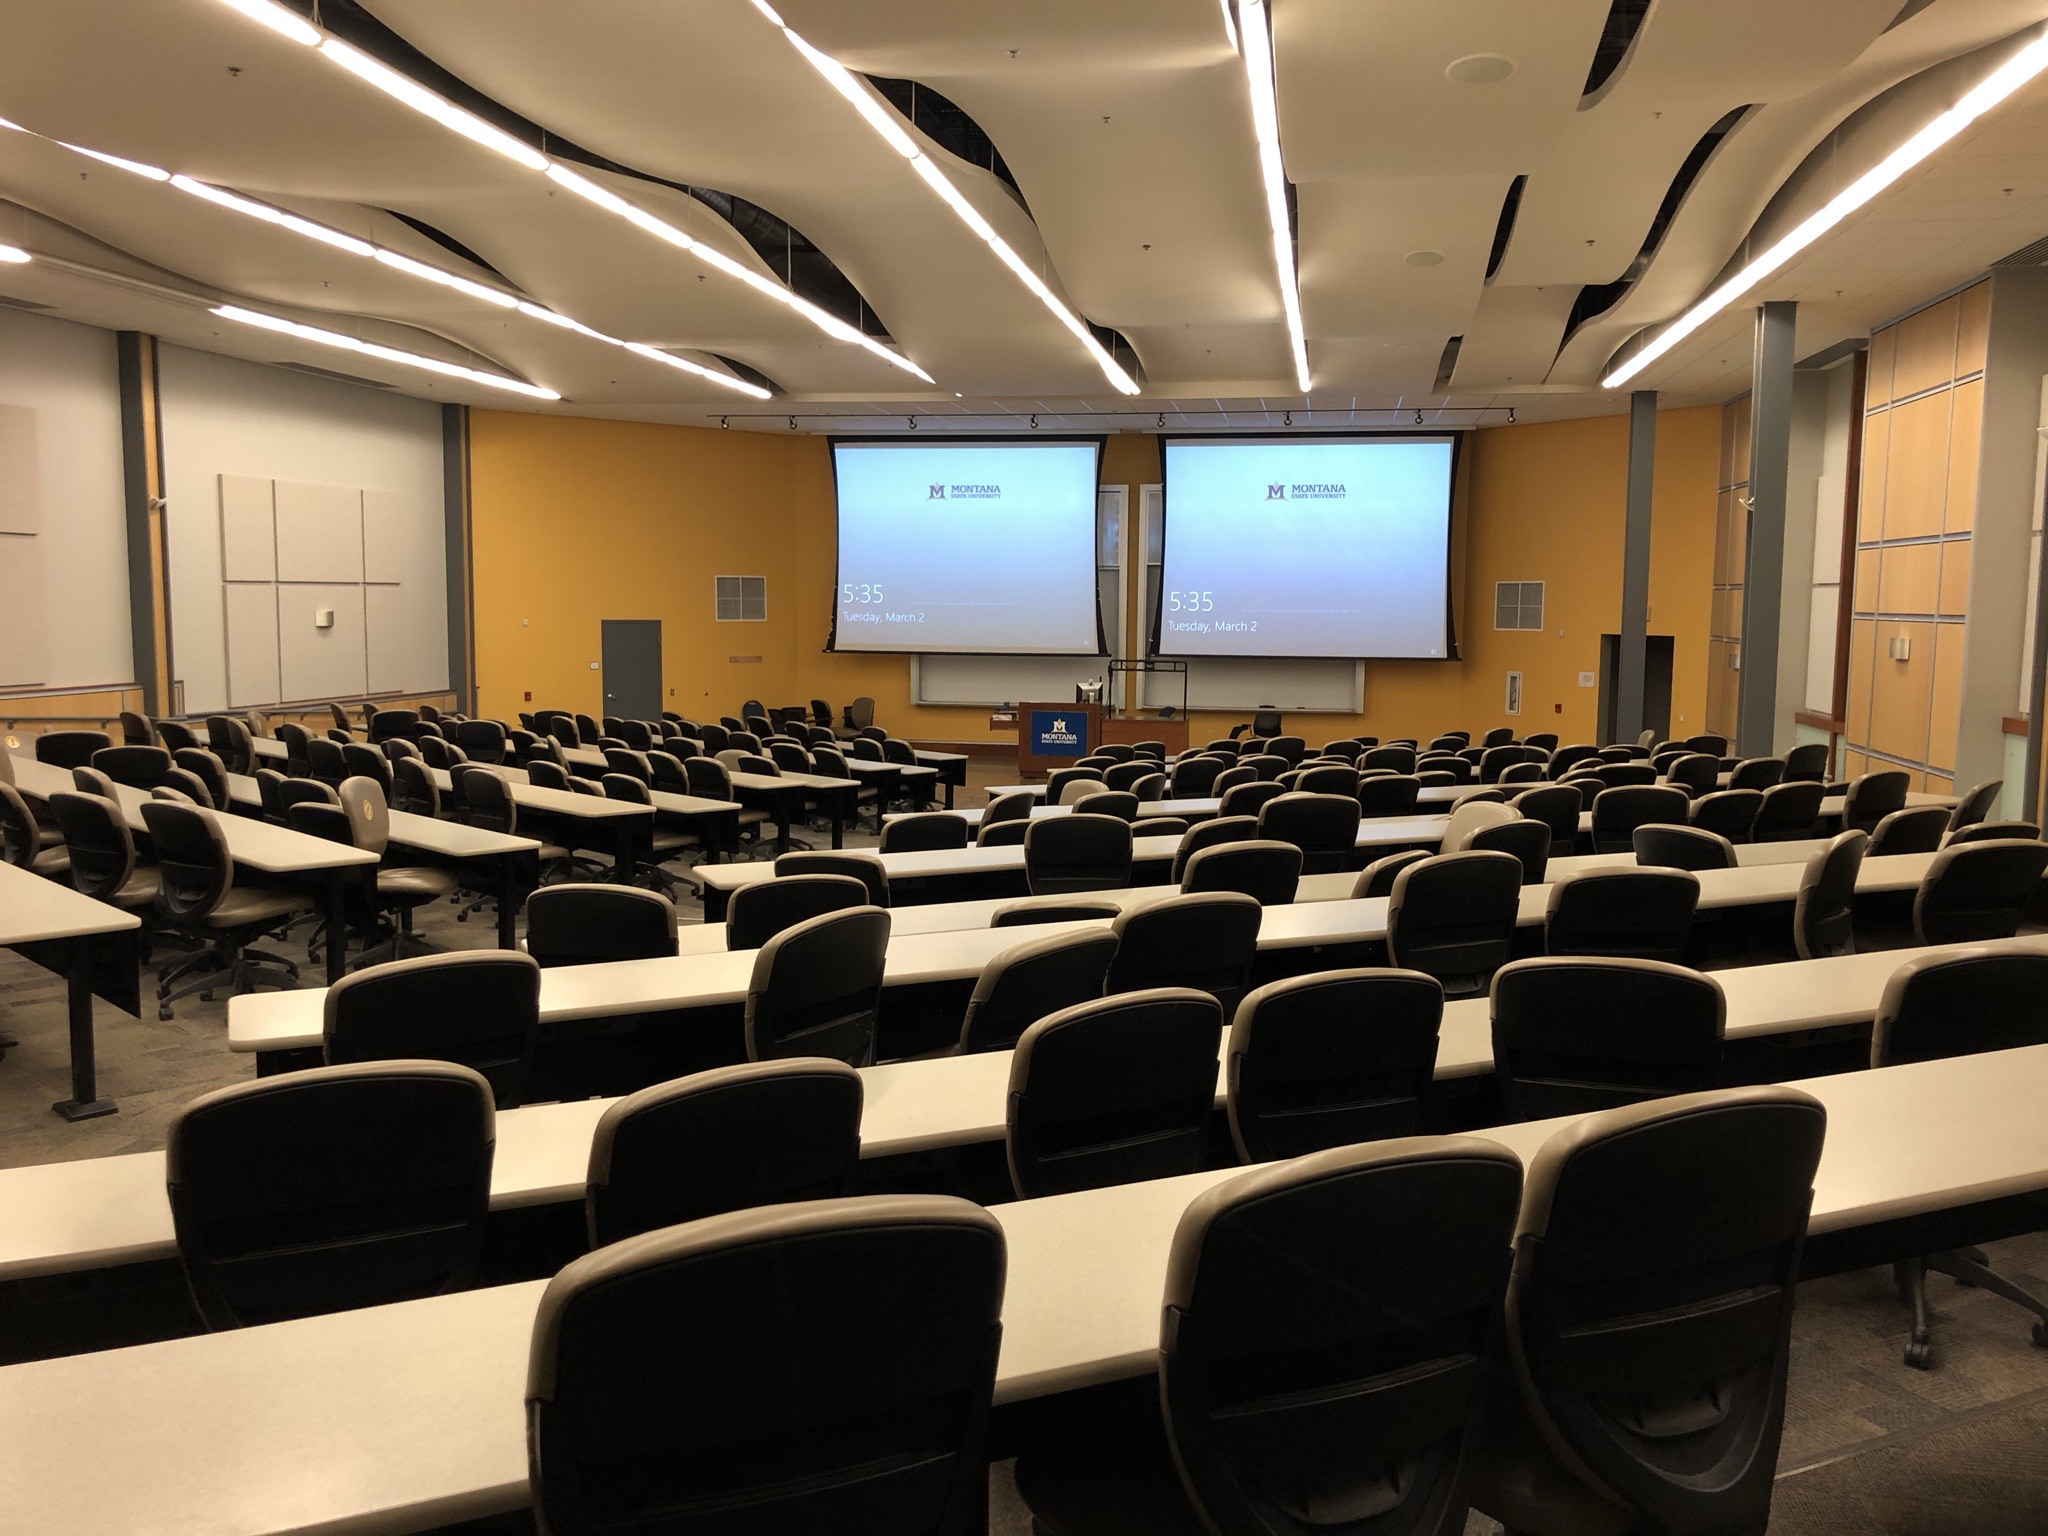 Gaines 101 lecture hall, view from rear